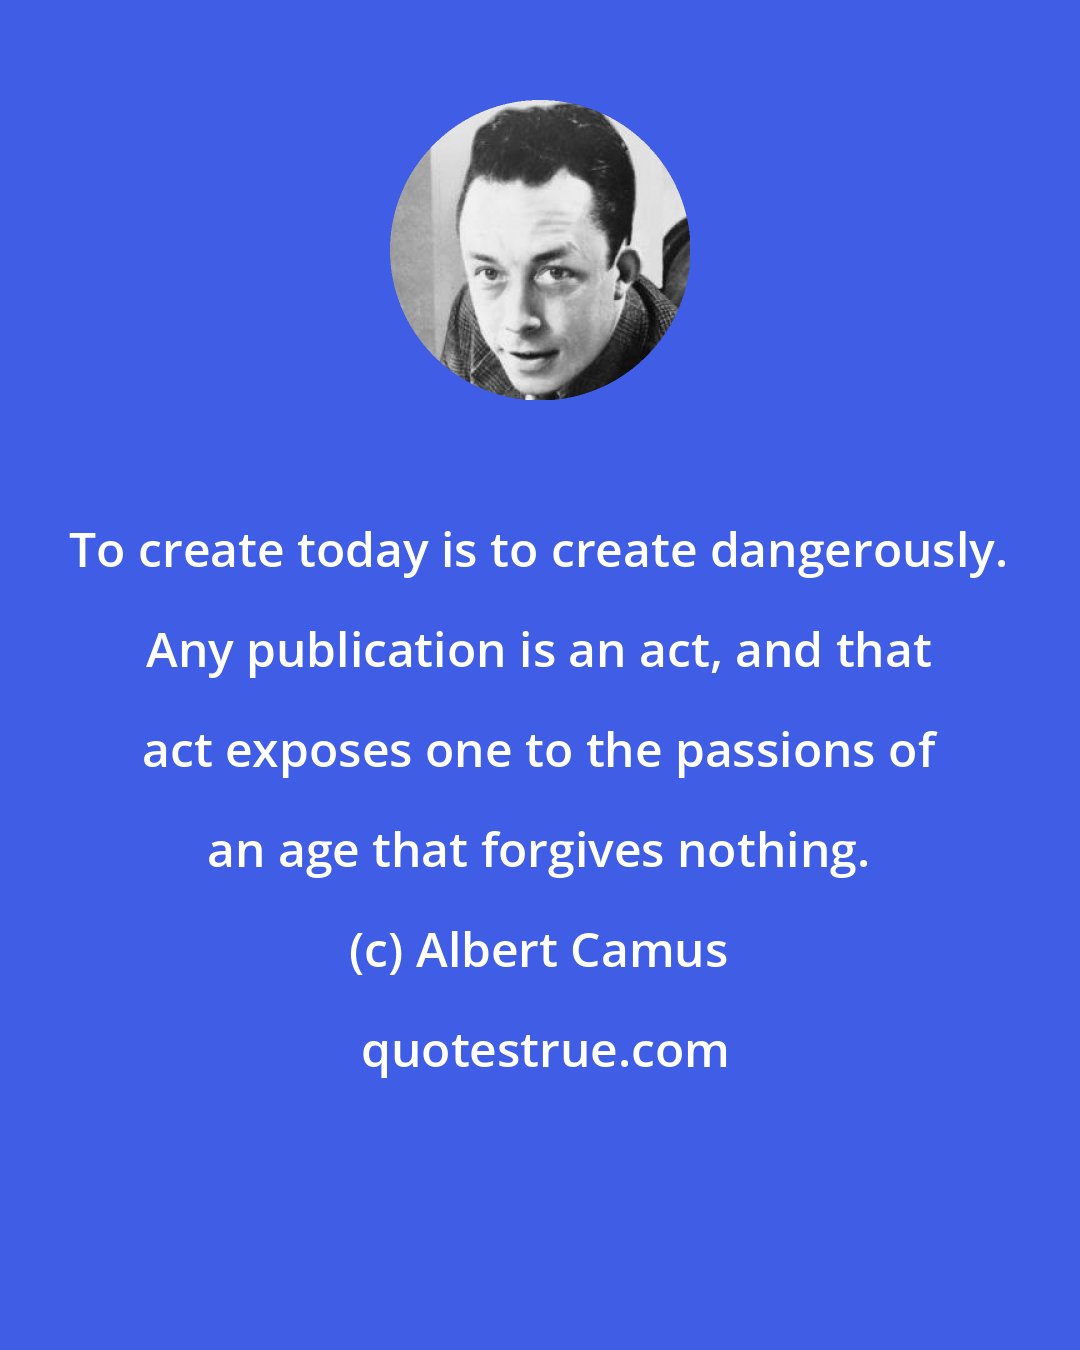 Albert Camus: To create today is to create dangerously. Any publication is an act, and that act exposes one to the passions of an age that forgives nothing.